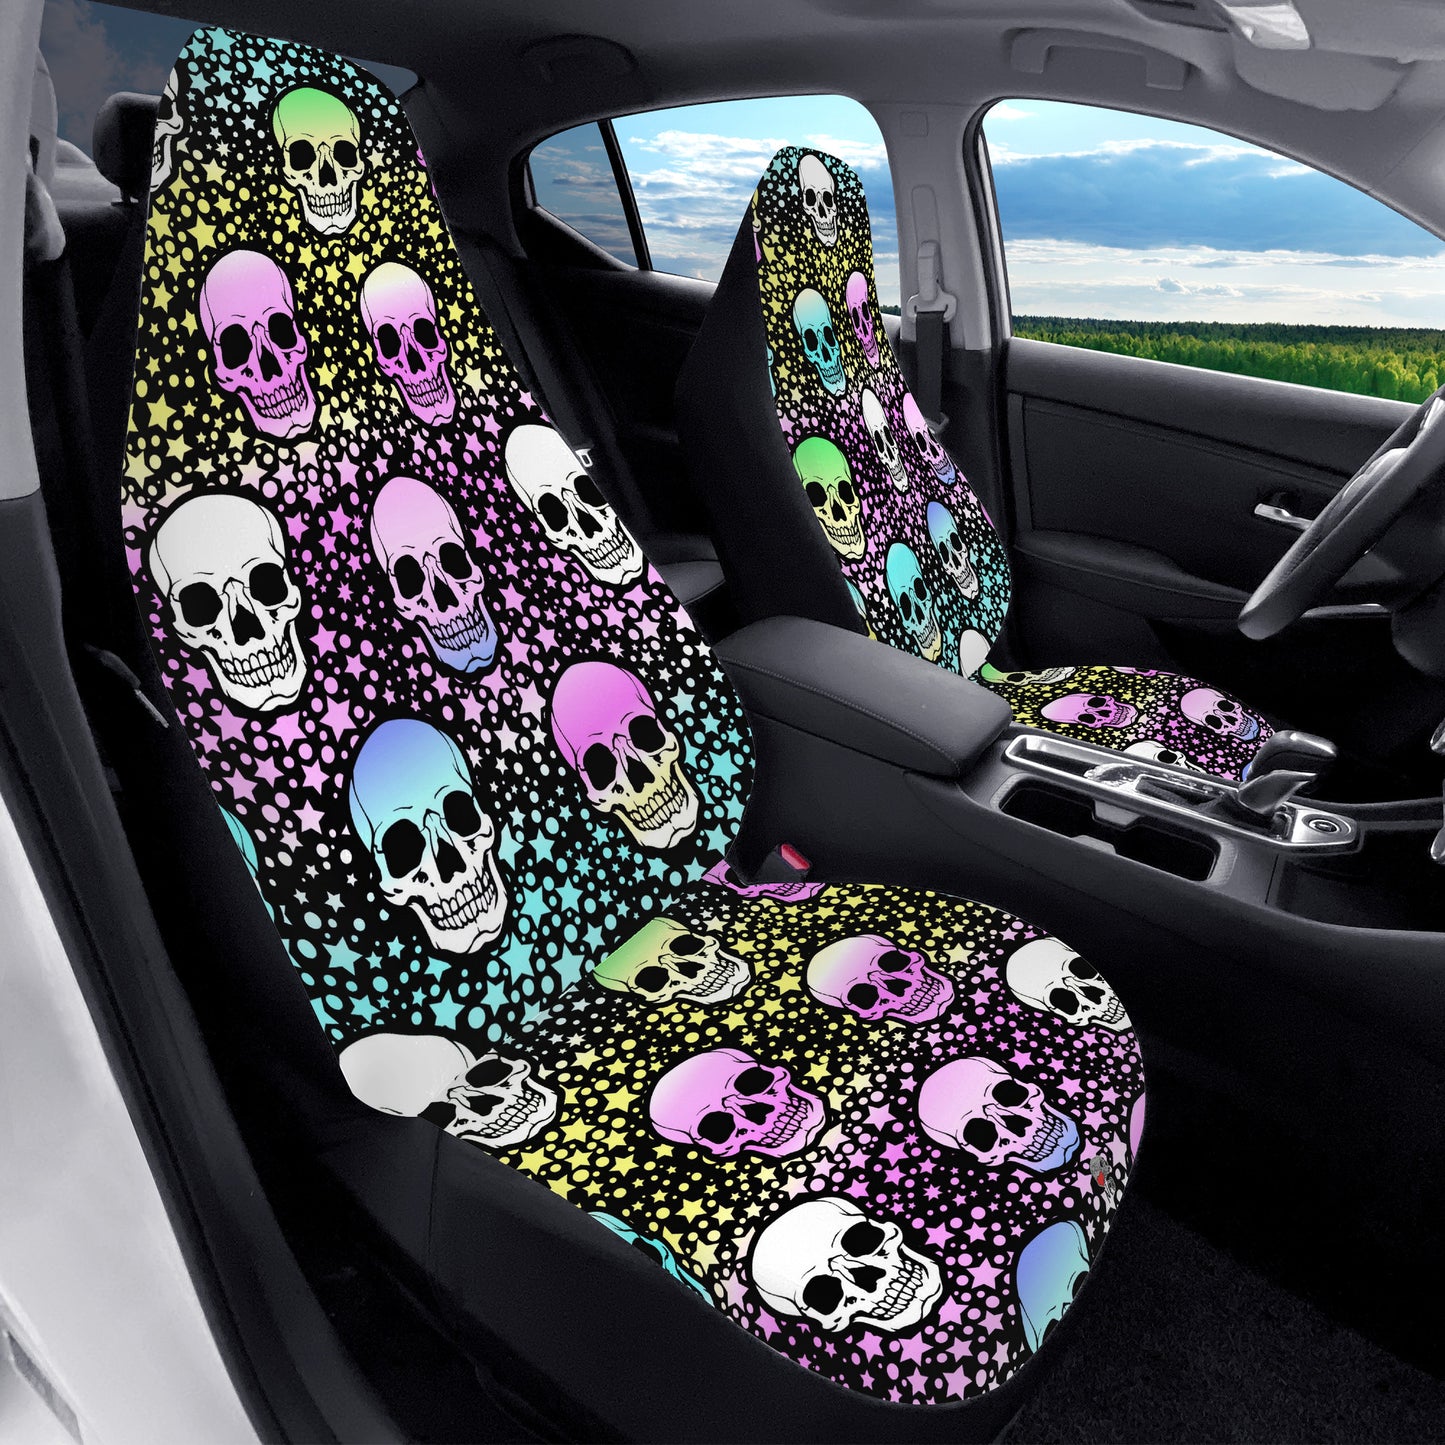 Pale Face Skulls Car Seat Covers